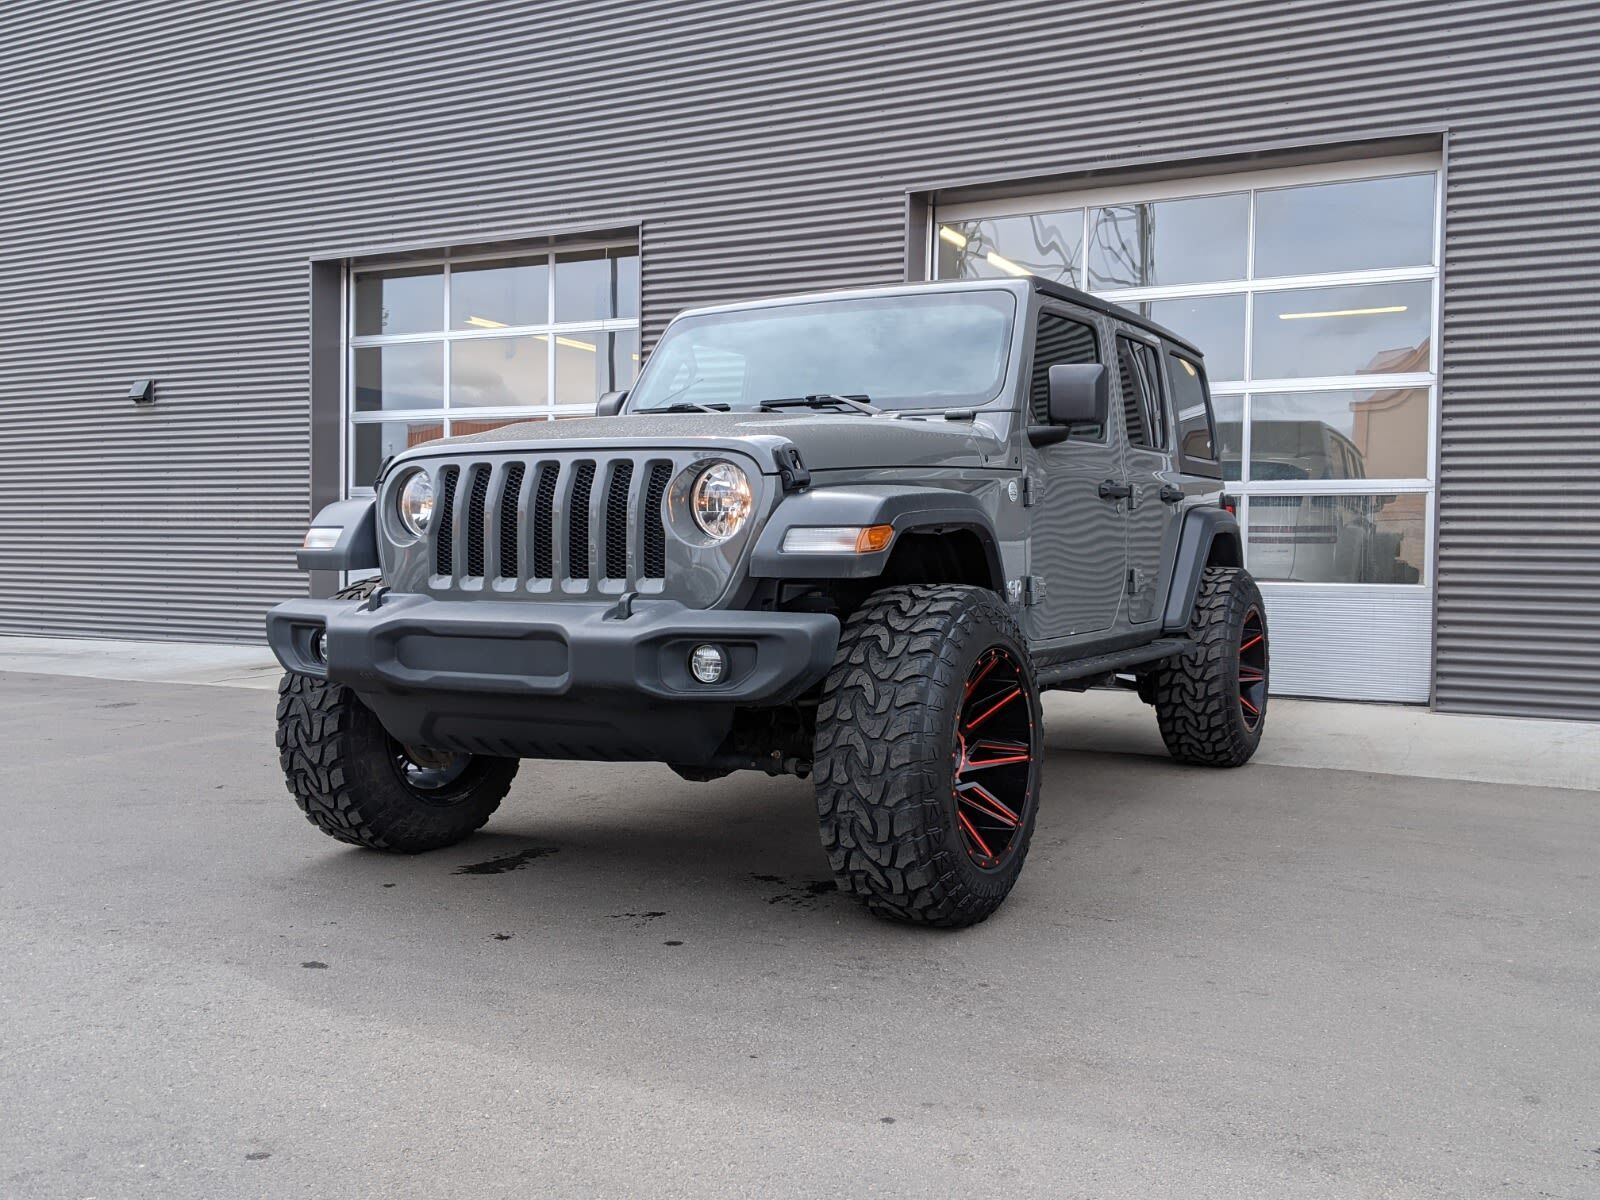 2019 Jeep WRANGLER UNLIMITED Sport 4X4 LIFTED, MUDDERS - No Accidents!